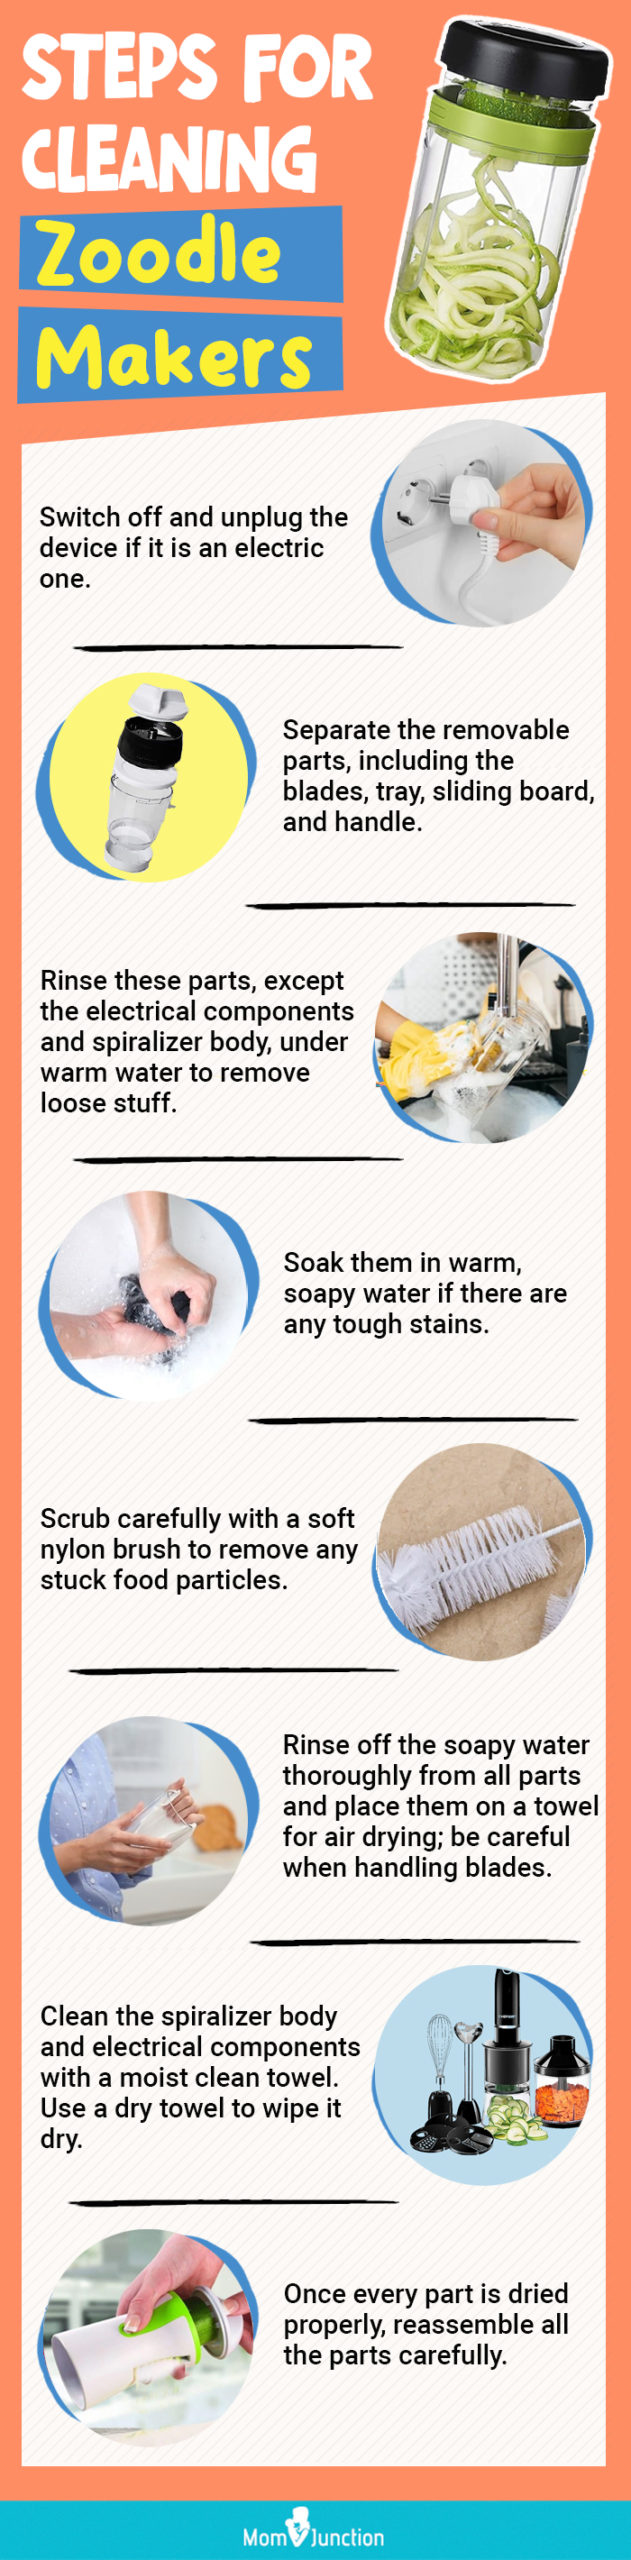 Steps For Cleaning Zoodle Makers (infographic)